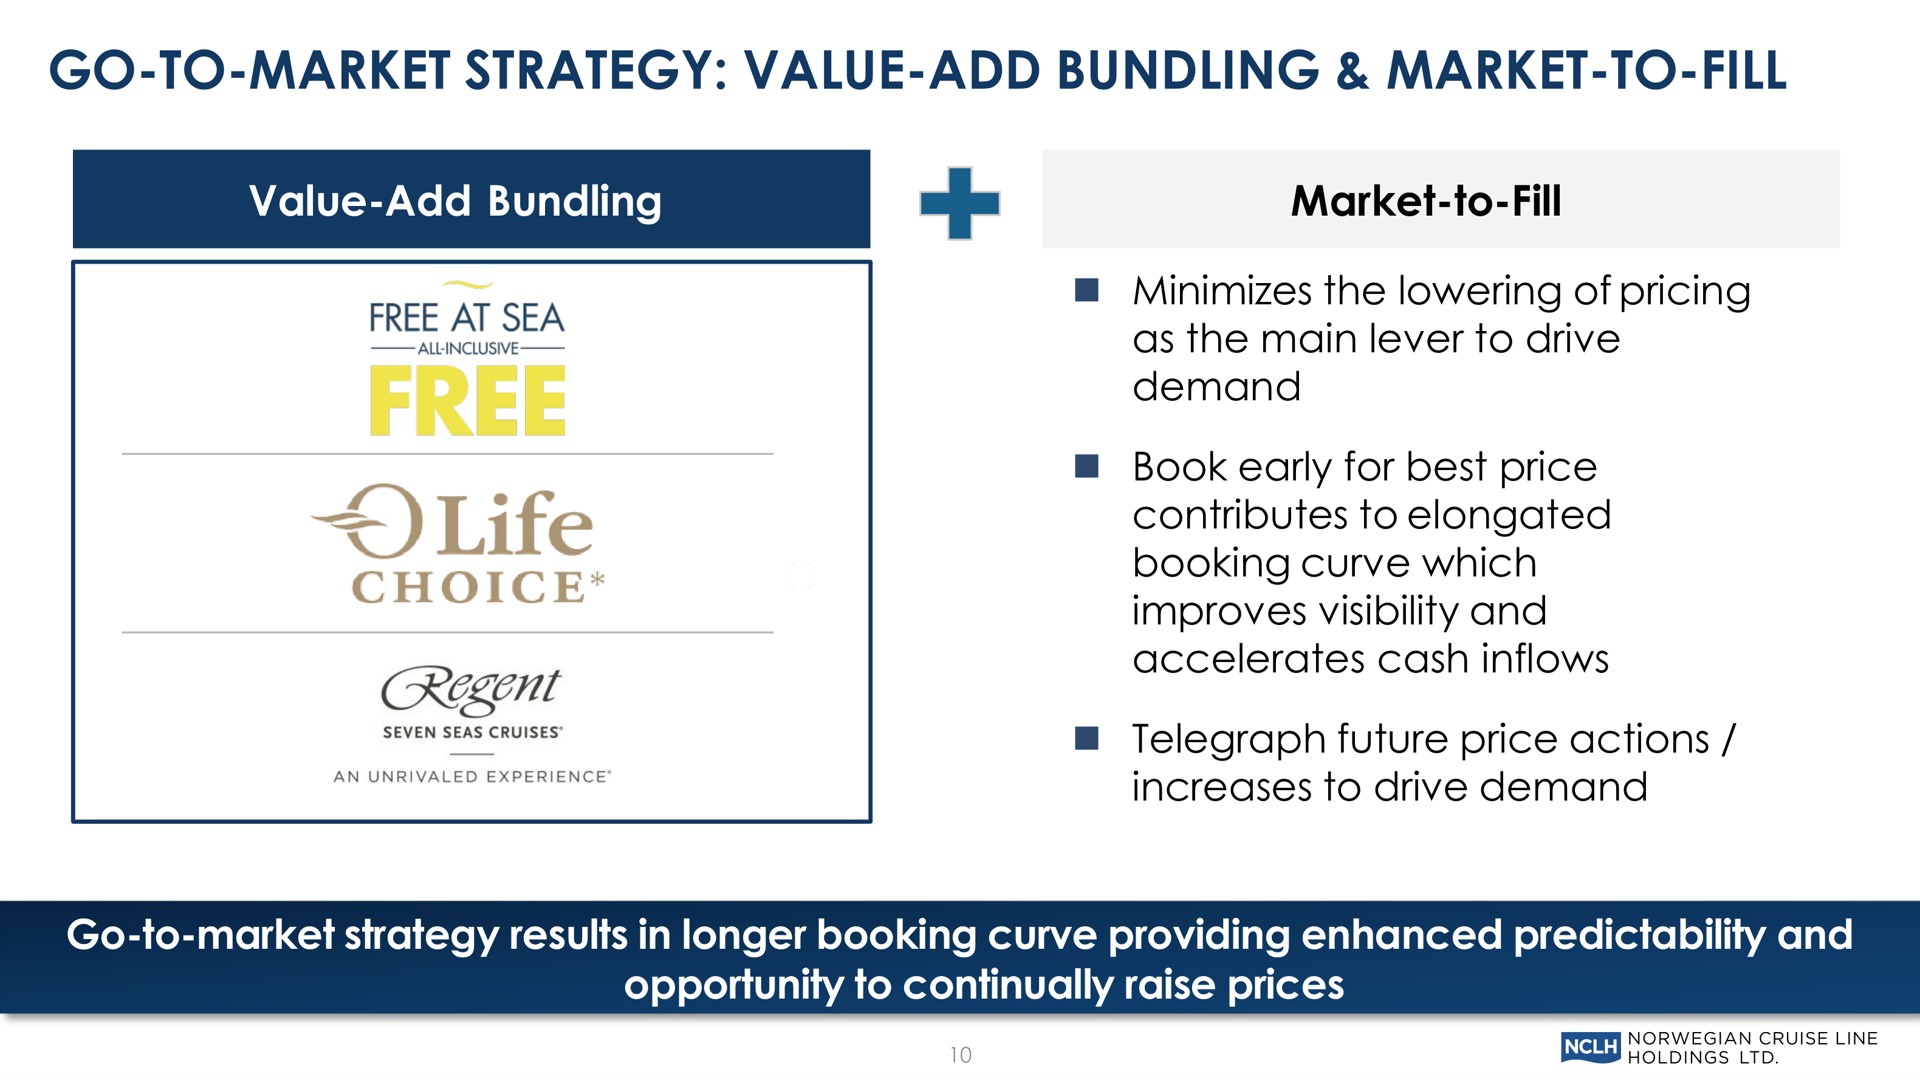 go to market strategy value add bundling market to fill value add bundling market to fill minimizes the lowering of pricing as the main lever to drive demand book early for best price contributes to elongated booking curve which improves visibility and accelerates cash inflows telegraph future price actions increases to drive demand go to market strategy results in longer booking curve providing enhanced predictability and opportunity to continually raise prices fee ani | Norwegian Cruise Line